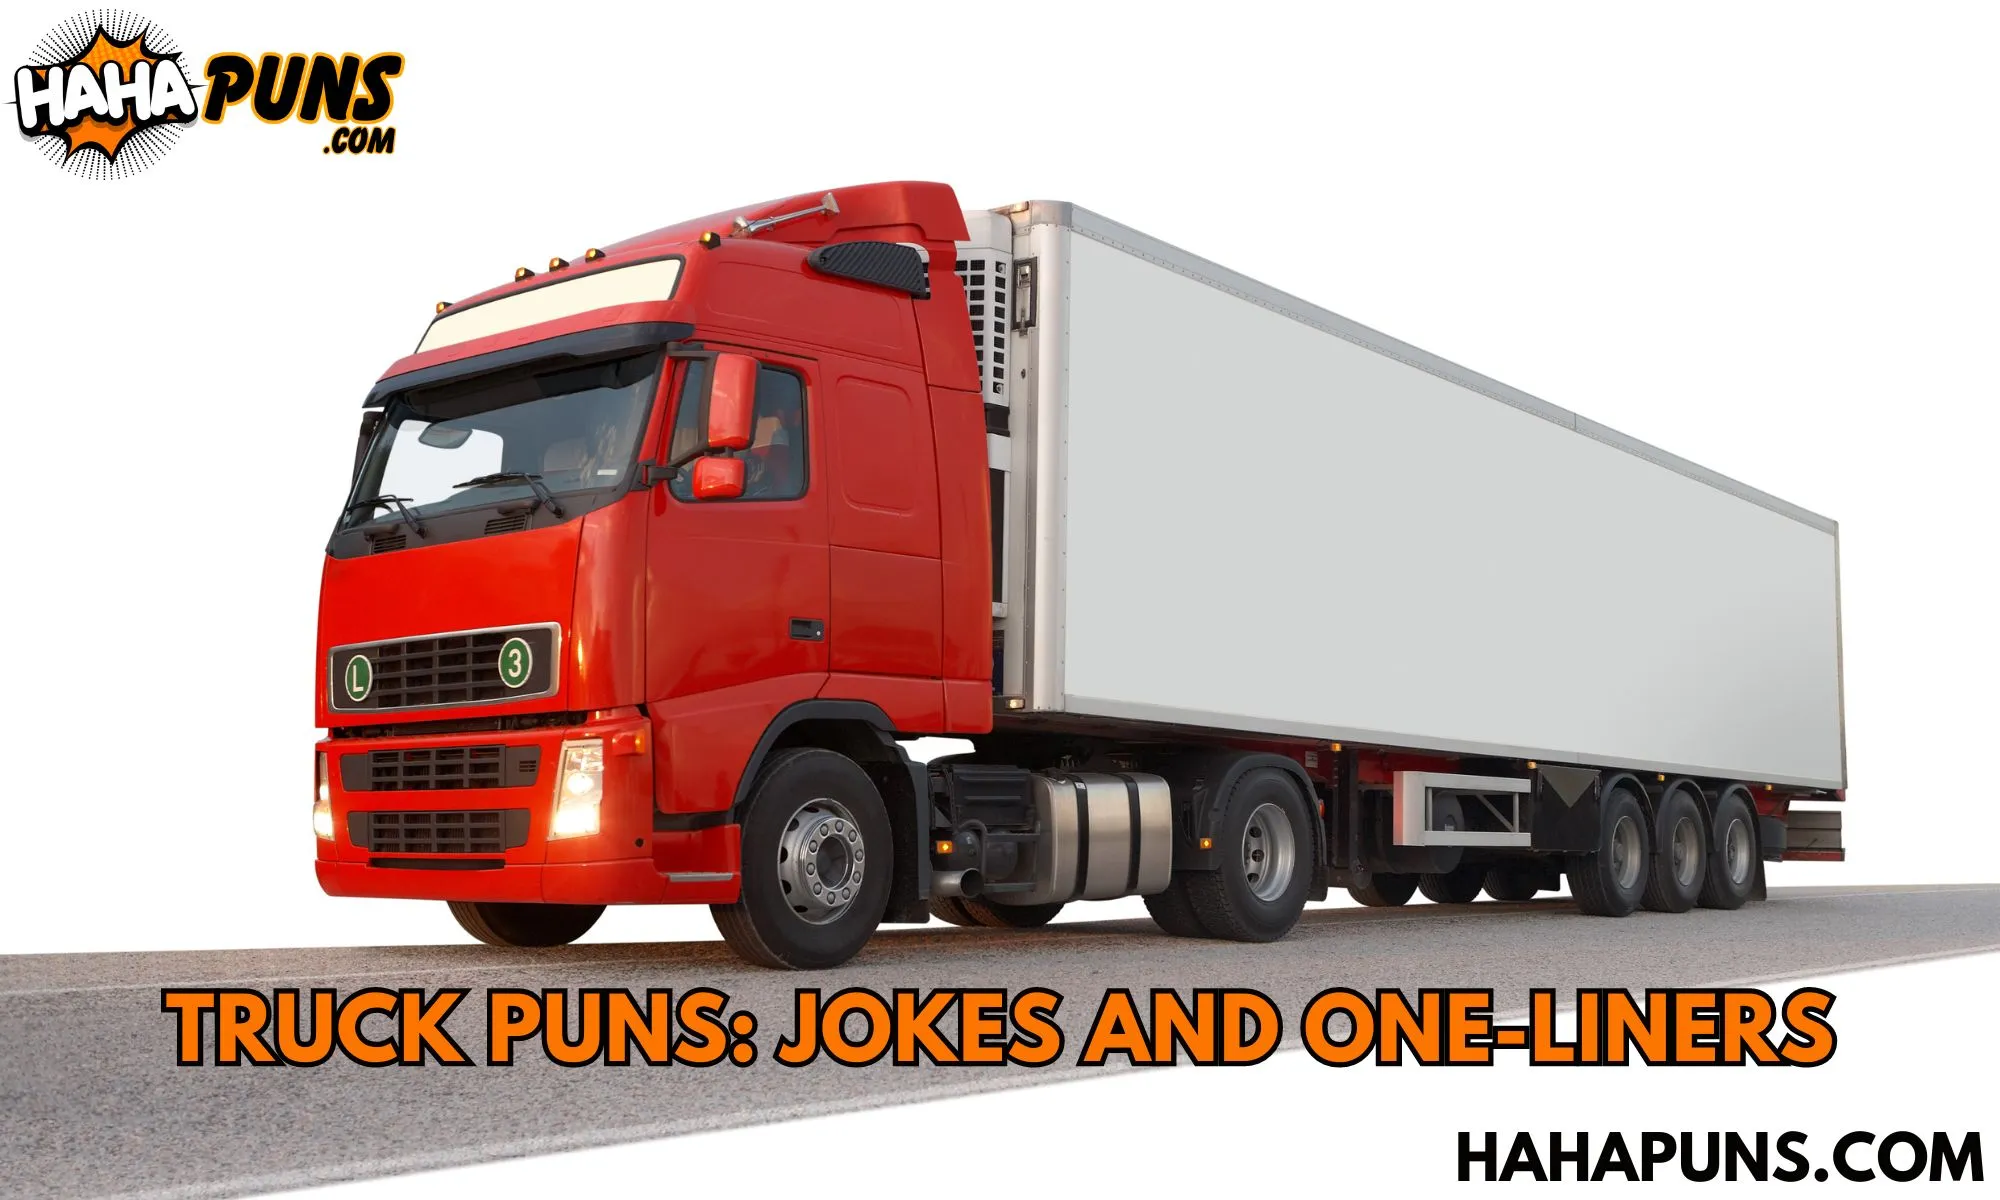 Truck Puns: Jokes And One-Liners